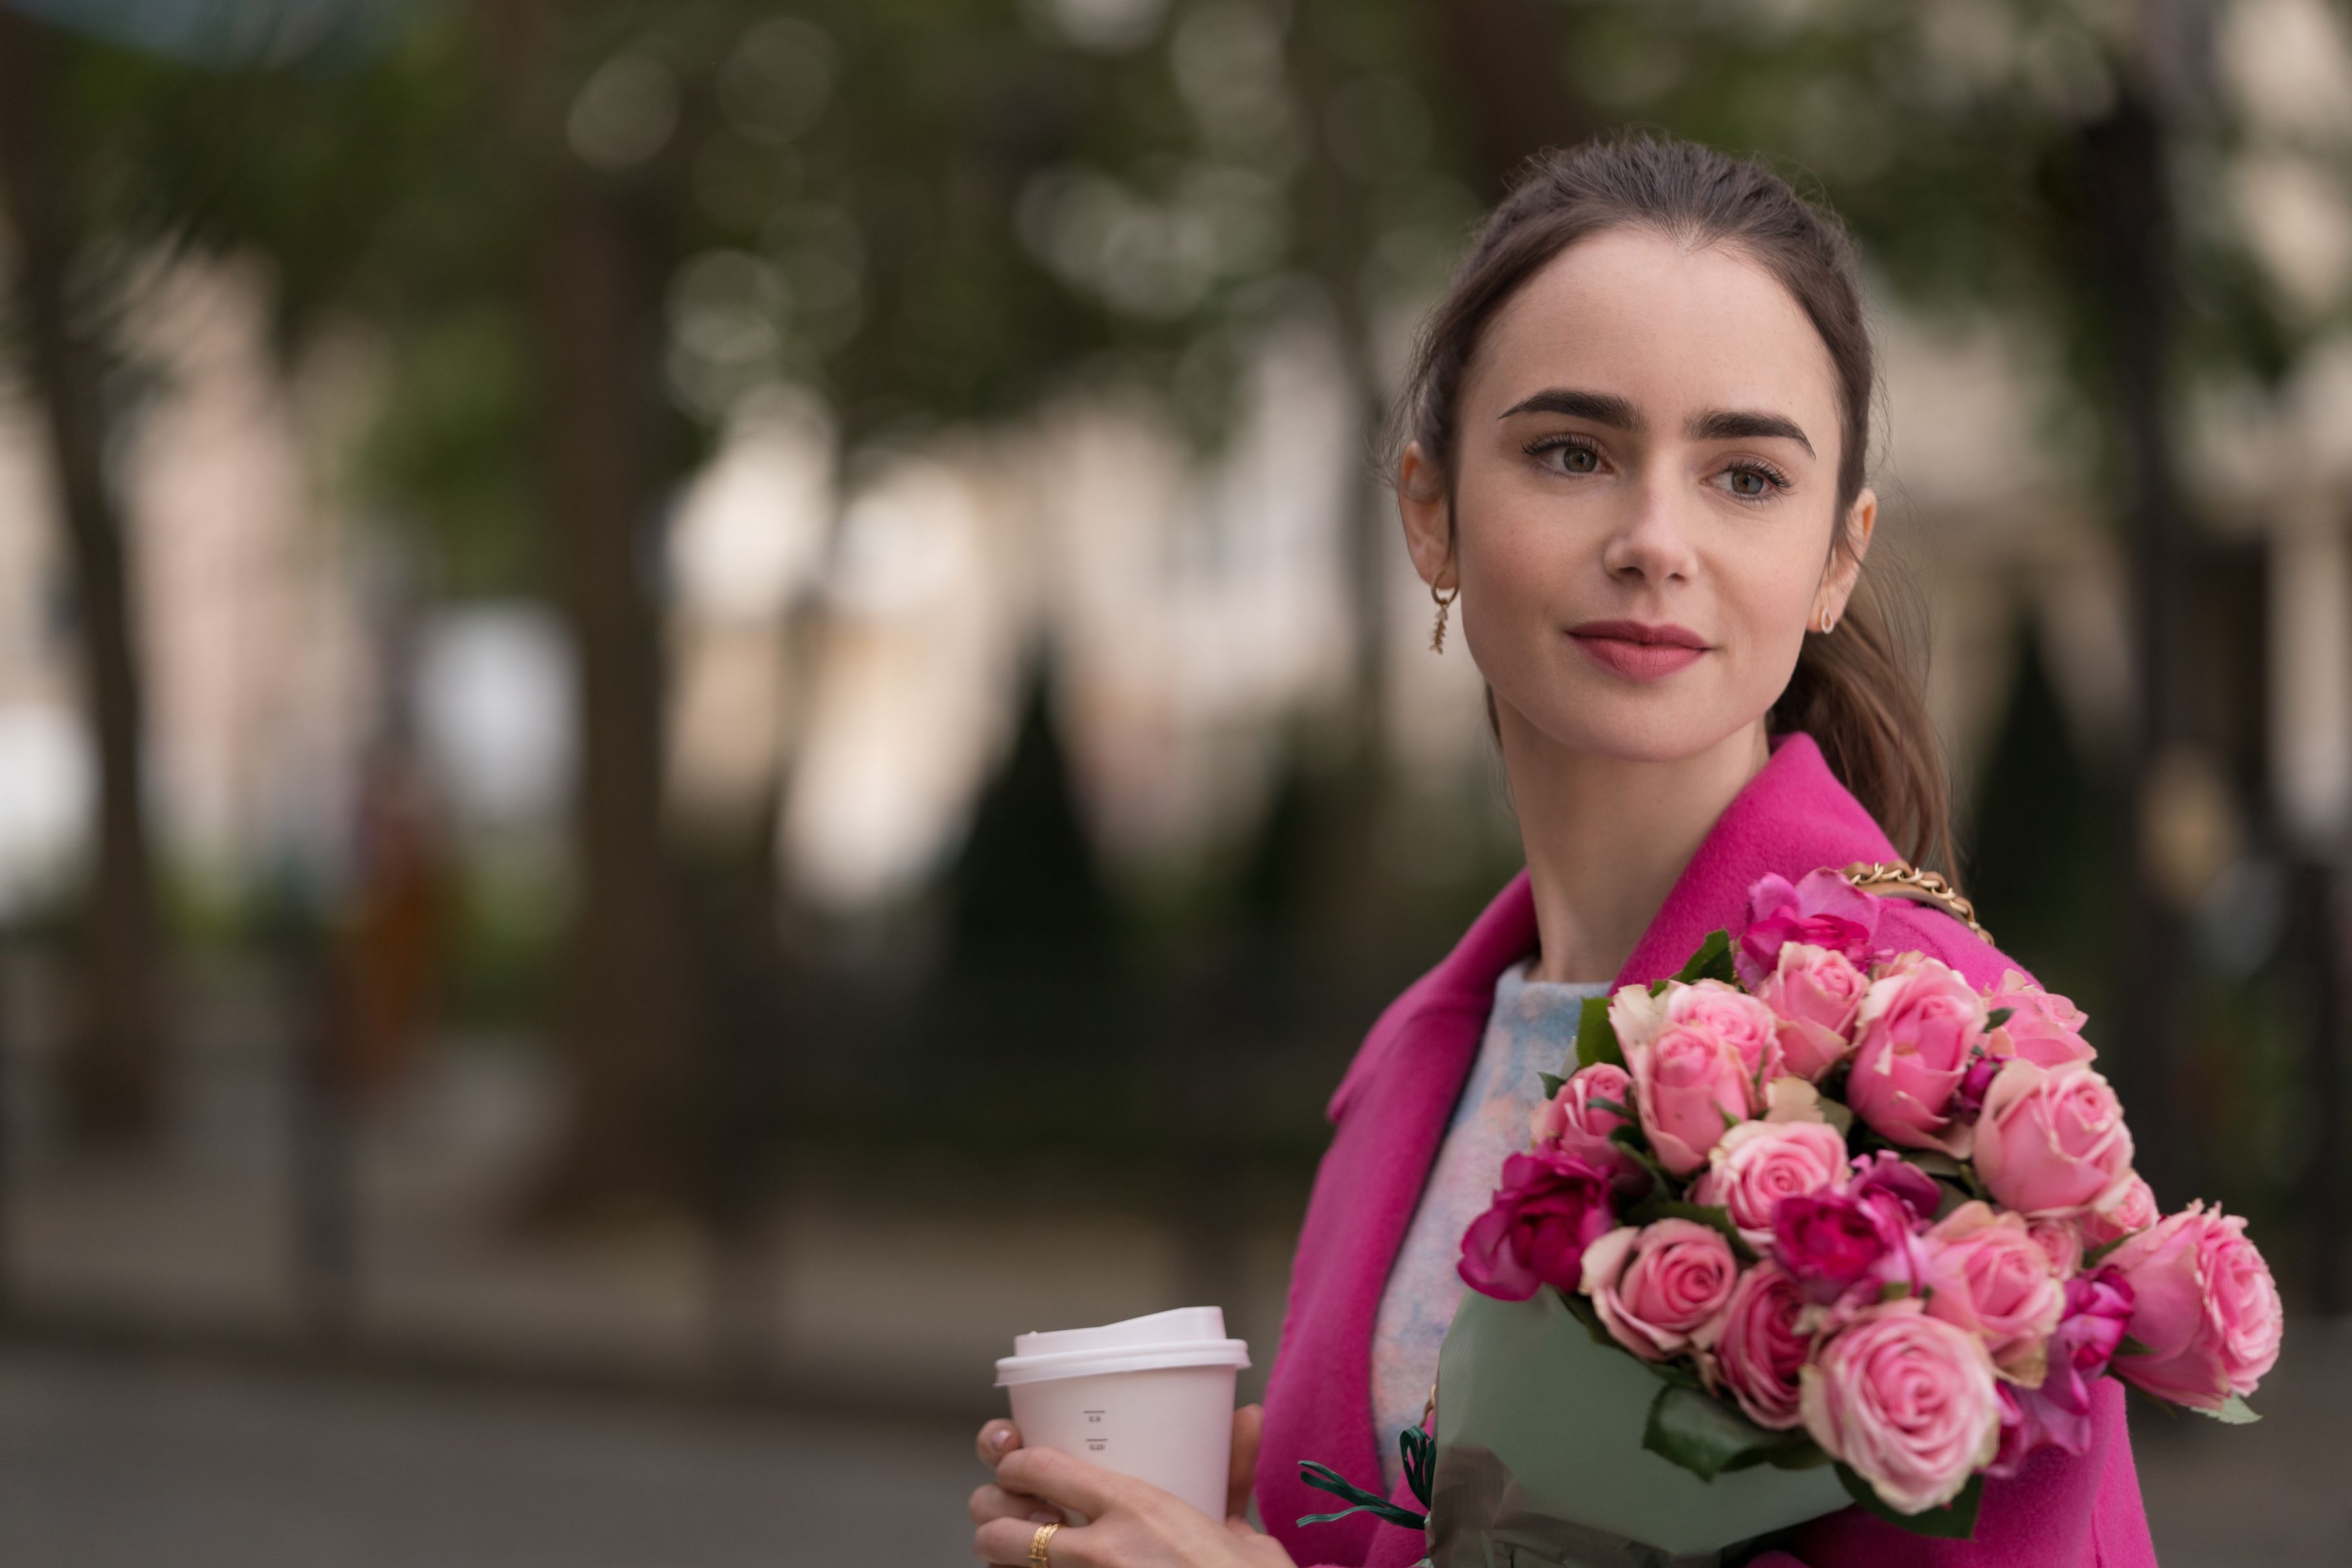 Watch: Lily Collins faces tough choices in 'Emily in Paris' Season 3 